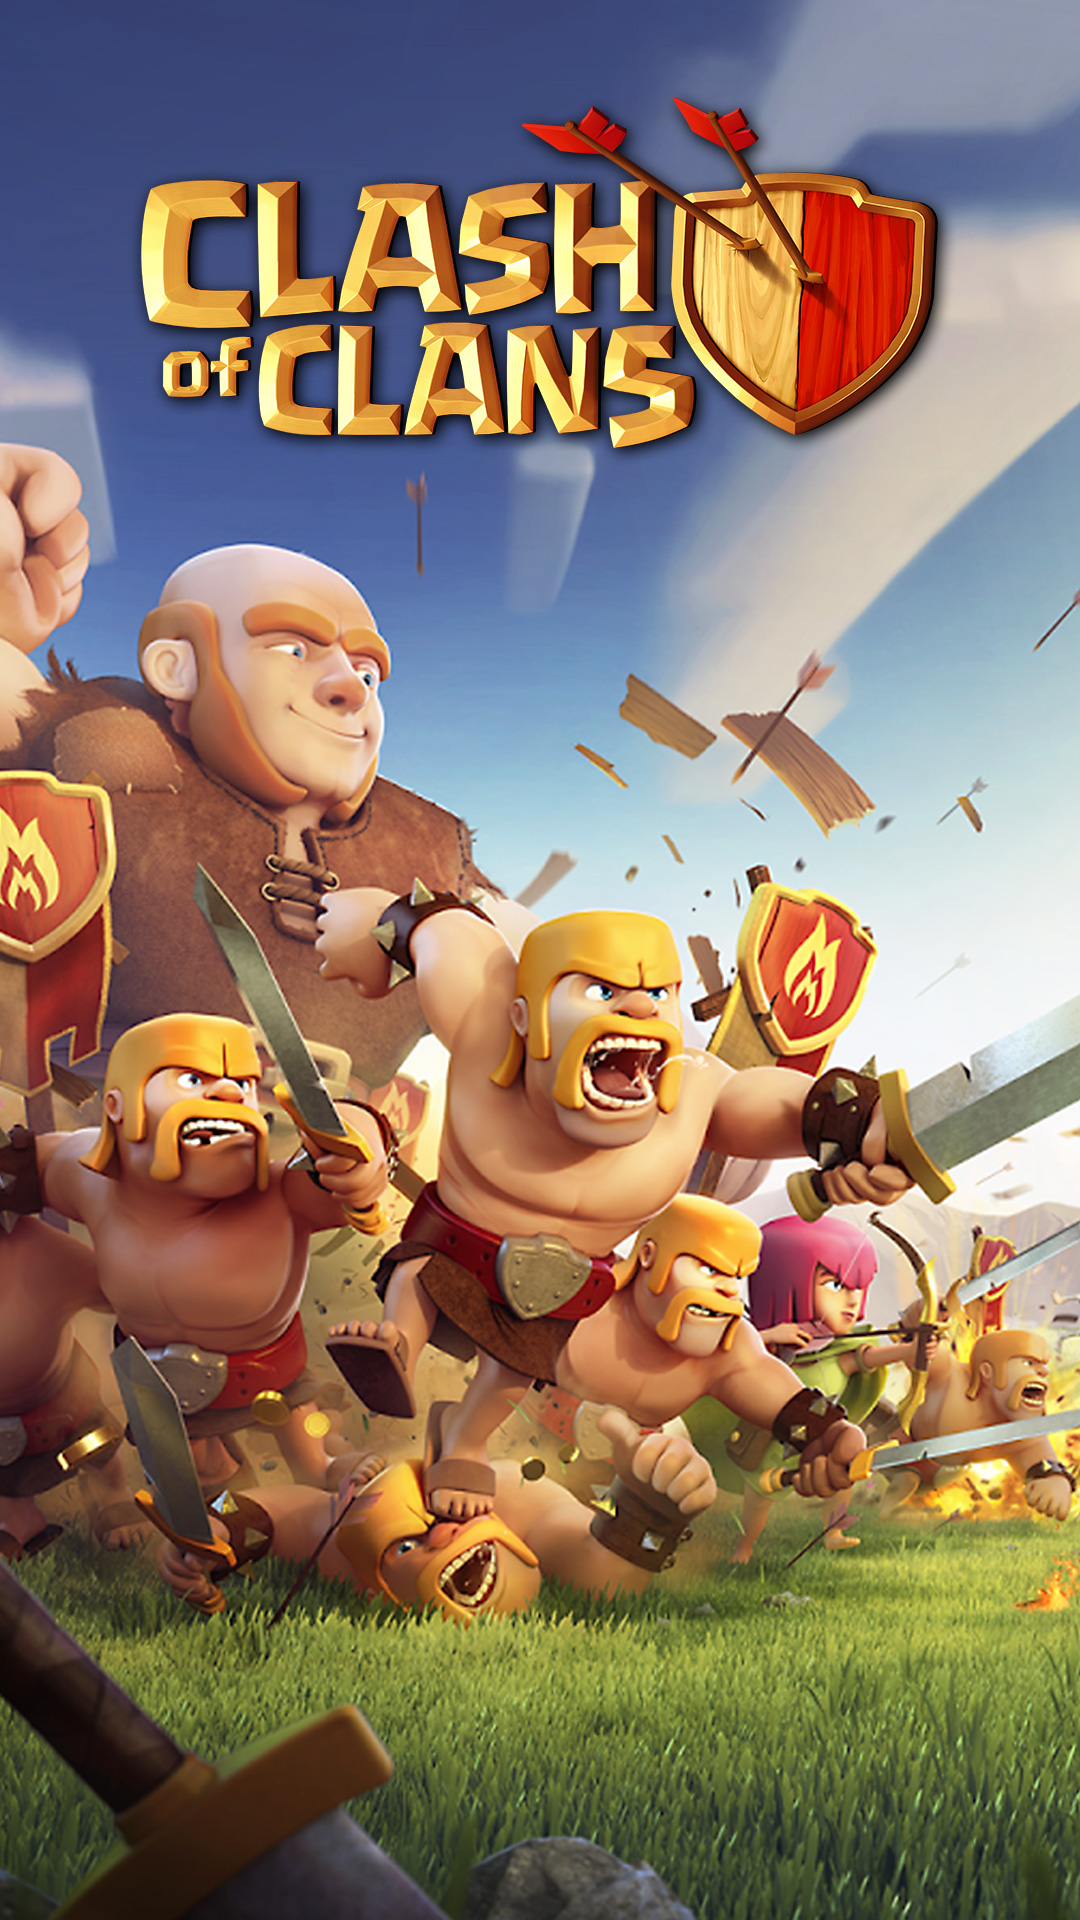 Clash Of Clans Wallpaper Background - Clash Of Clans Wallpaper Android - HD Wallpaper 